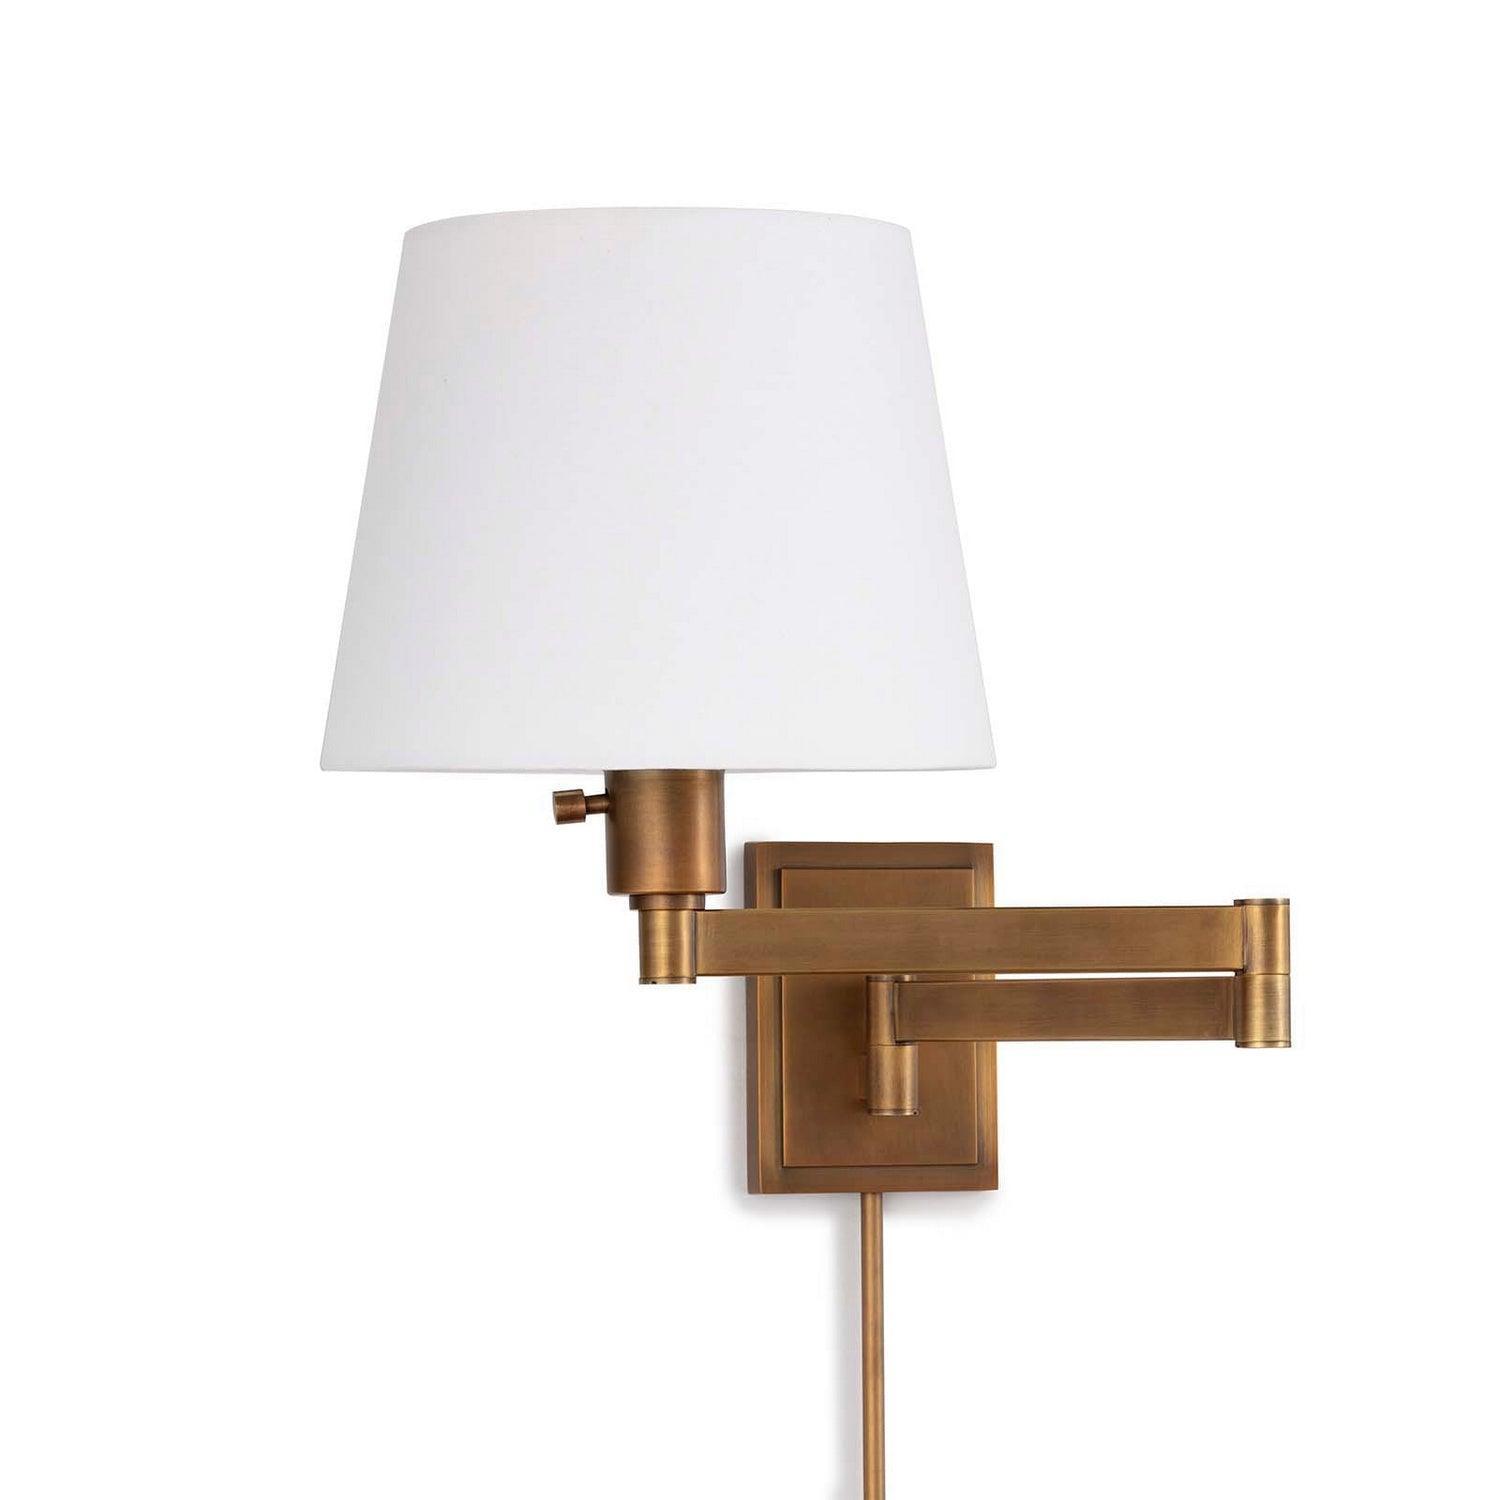 Regina Andrew - Southern Living Virtue Wall Sconce - 15-1161NB | Montreal Lighting & Hardware